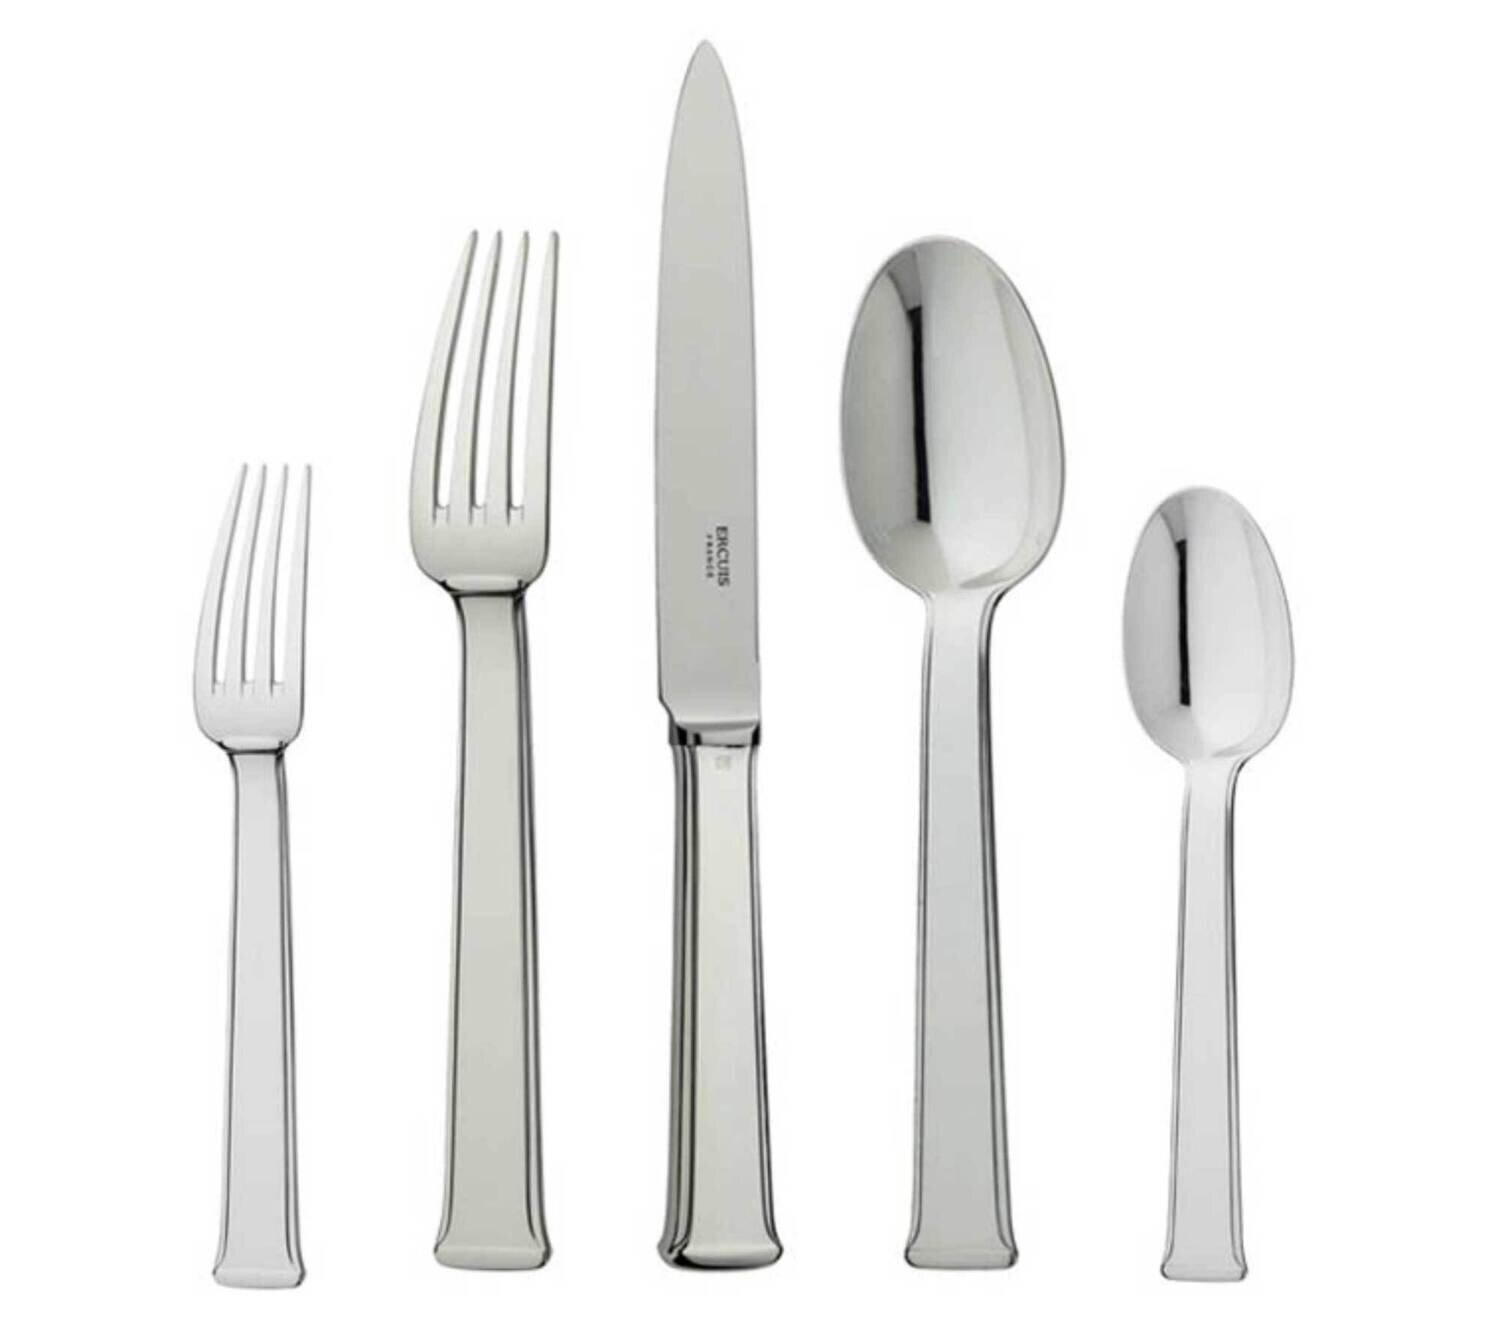 Ercuis Sequoia Dessert Fork 6.75 Inch Stainless Steel Silver plated F665930-05